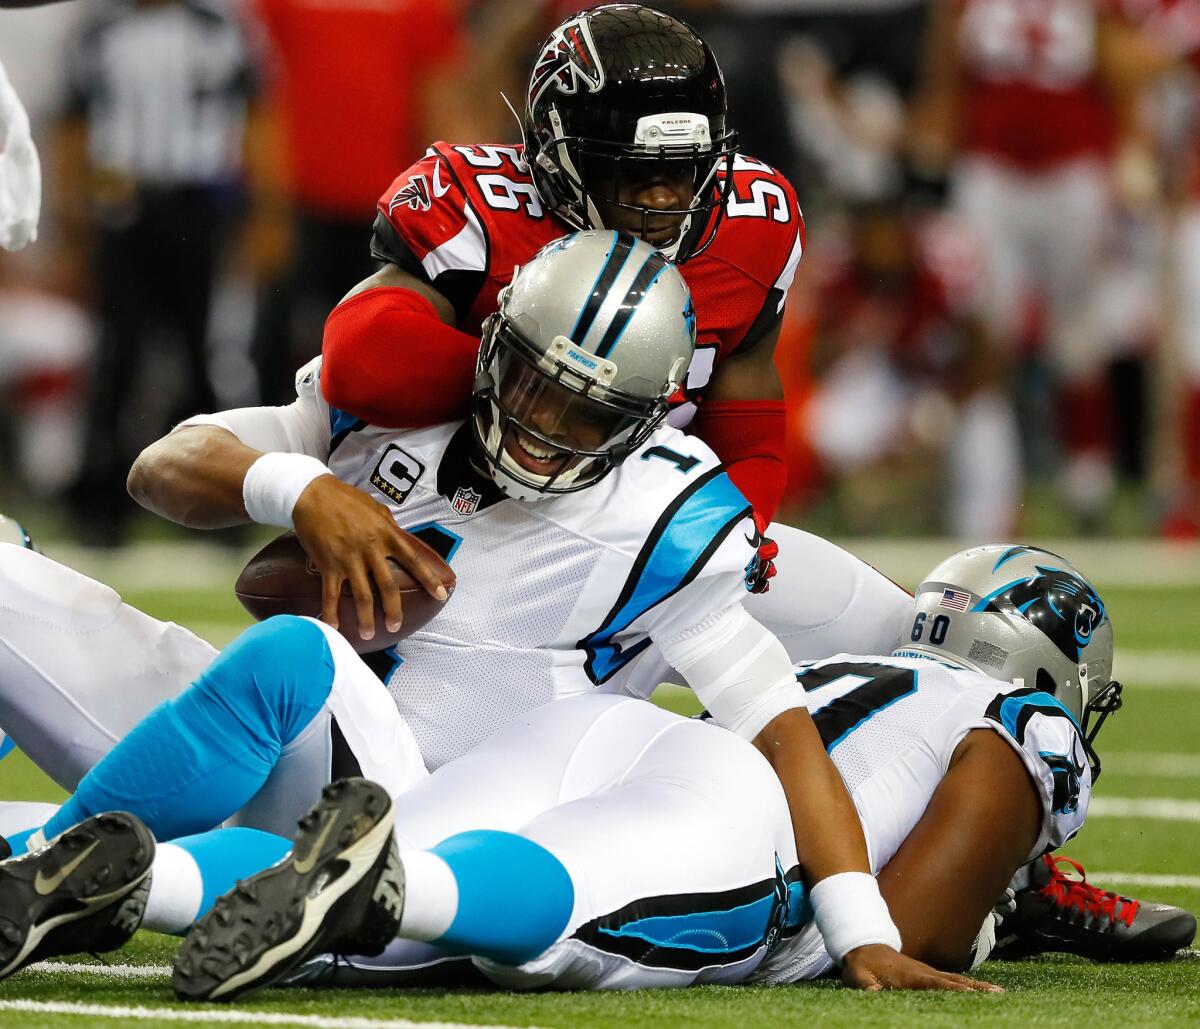 Panthers quarterback Cam Newton (1) is hit by Falcons linebacker Sean Weatherspoon (56) after pushing for a first down on Oct. 2.